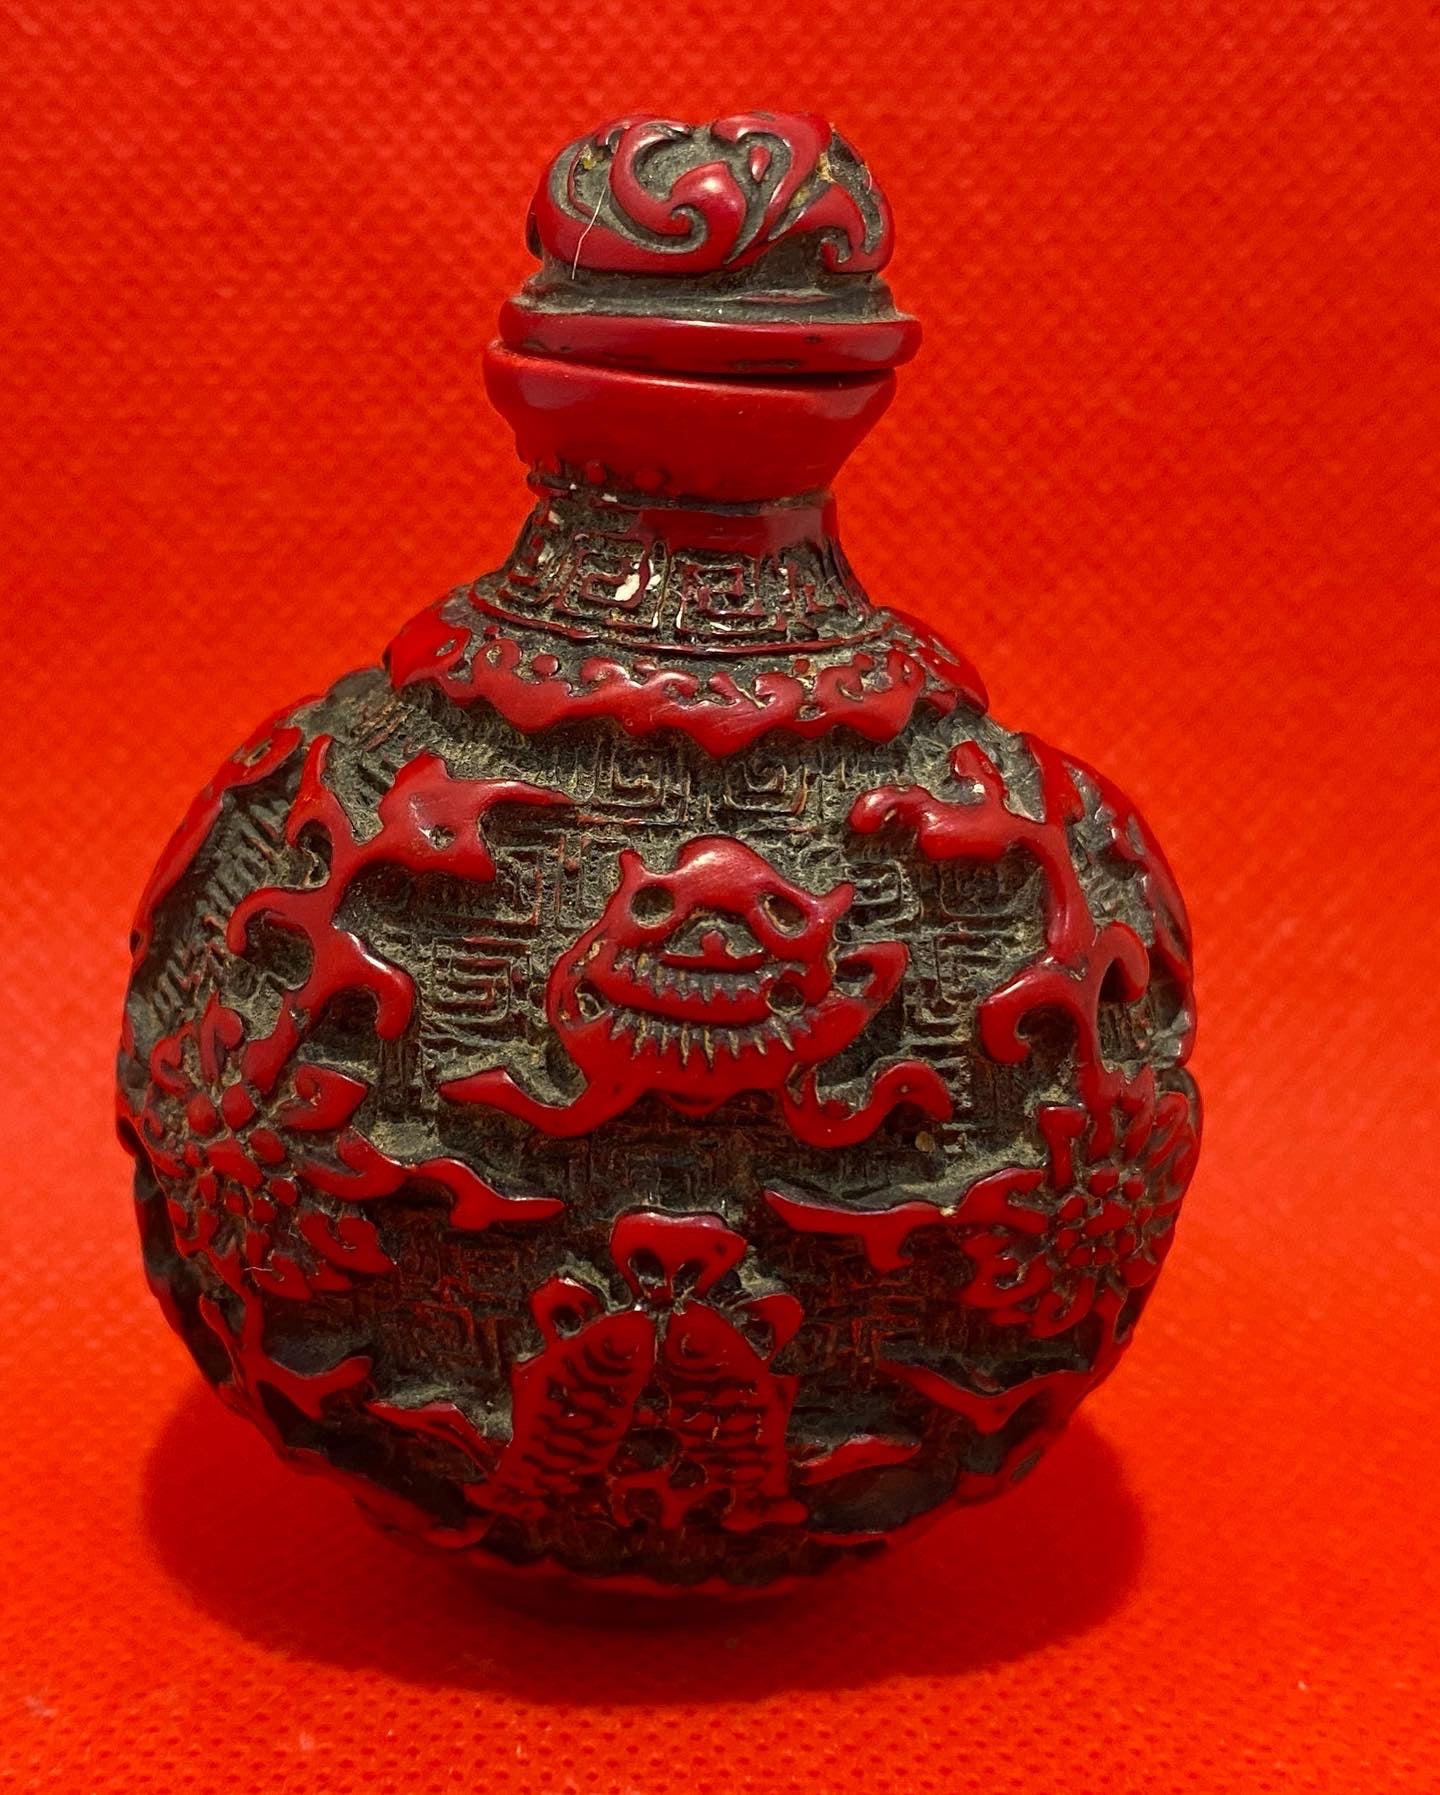 Antique Chinese Cinnabar lacquer snuff bottle, carved with Buddha Symbols. Original stopper. Early 20th century.